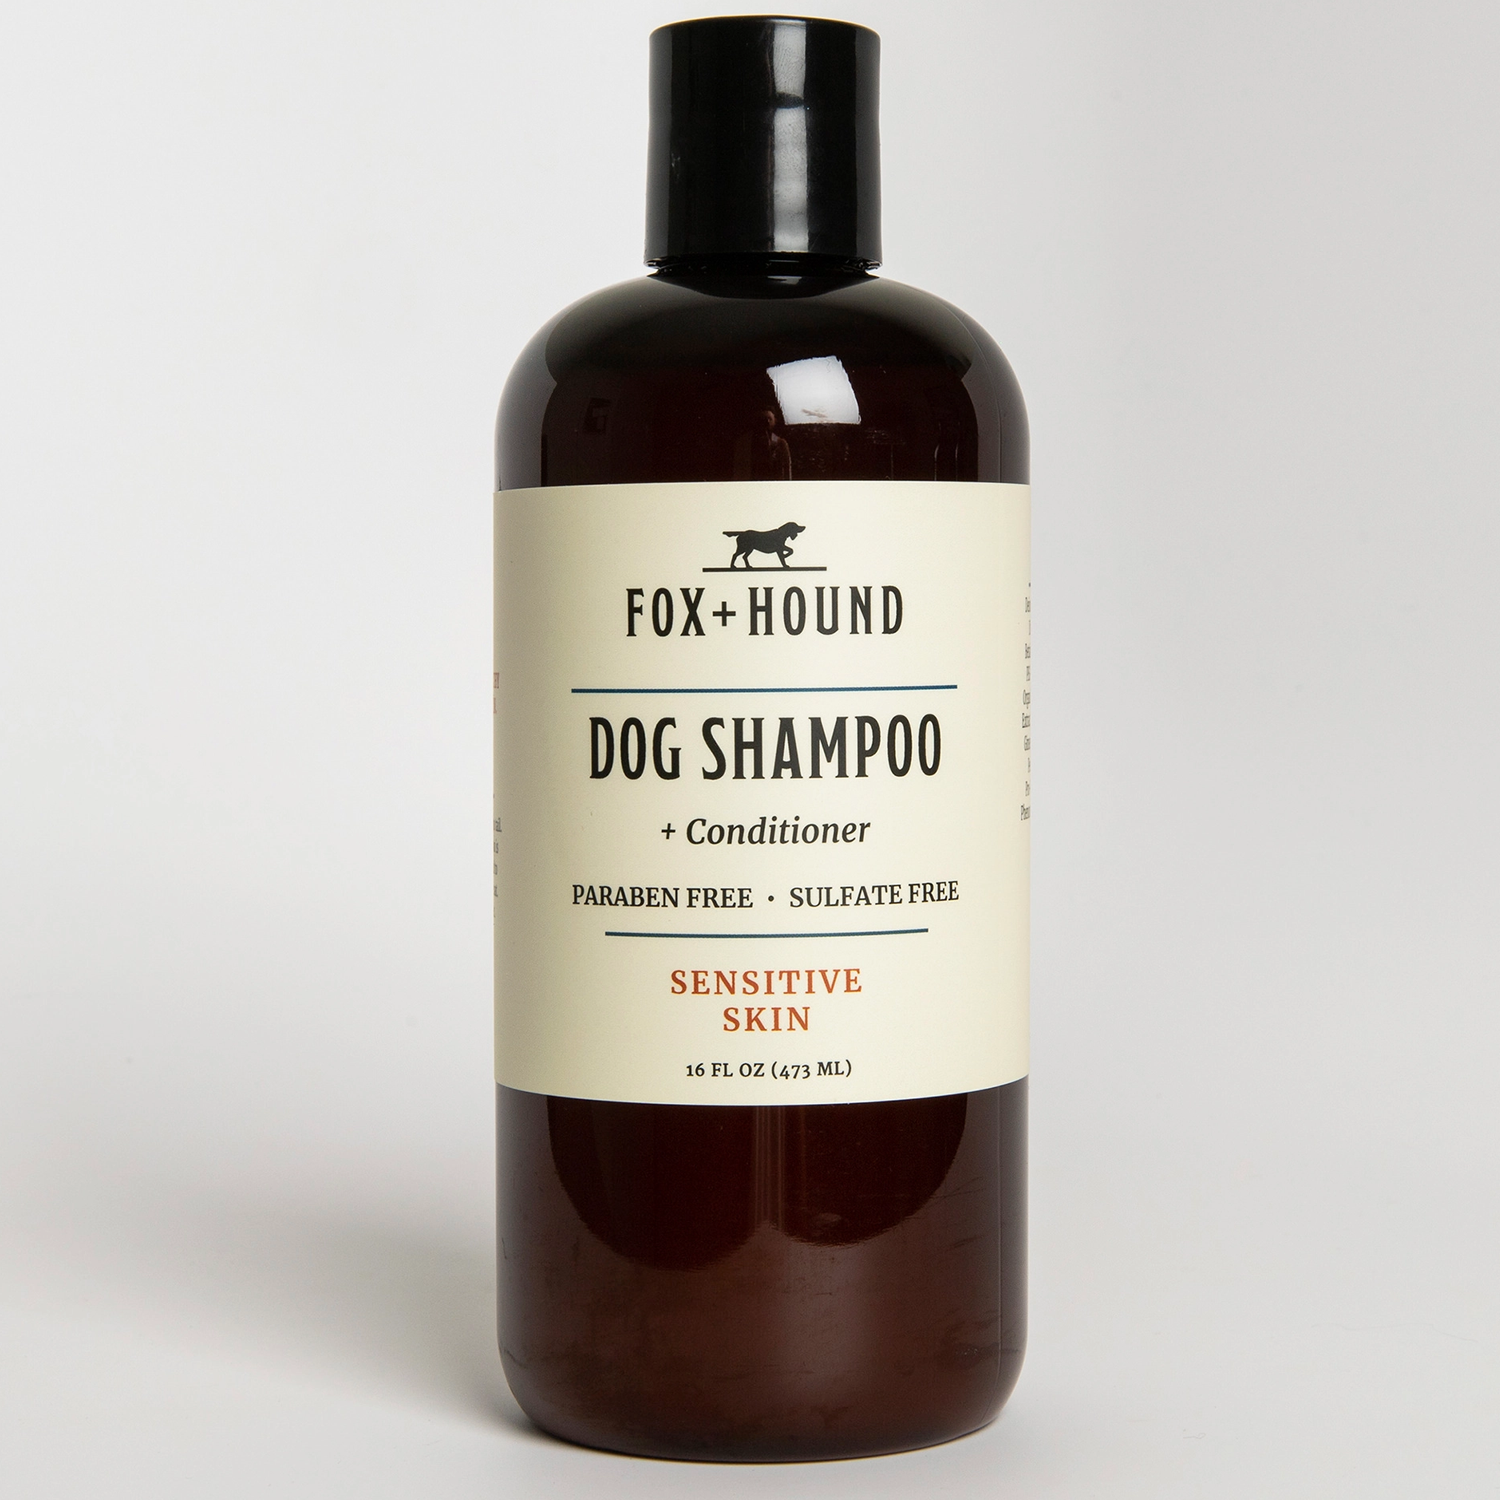 Pet Boutique - Dog Grooming - Bath and Body - Dog Shampoo + Conditioner: Sensitive Skin by Fox + Hound